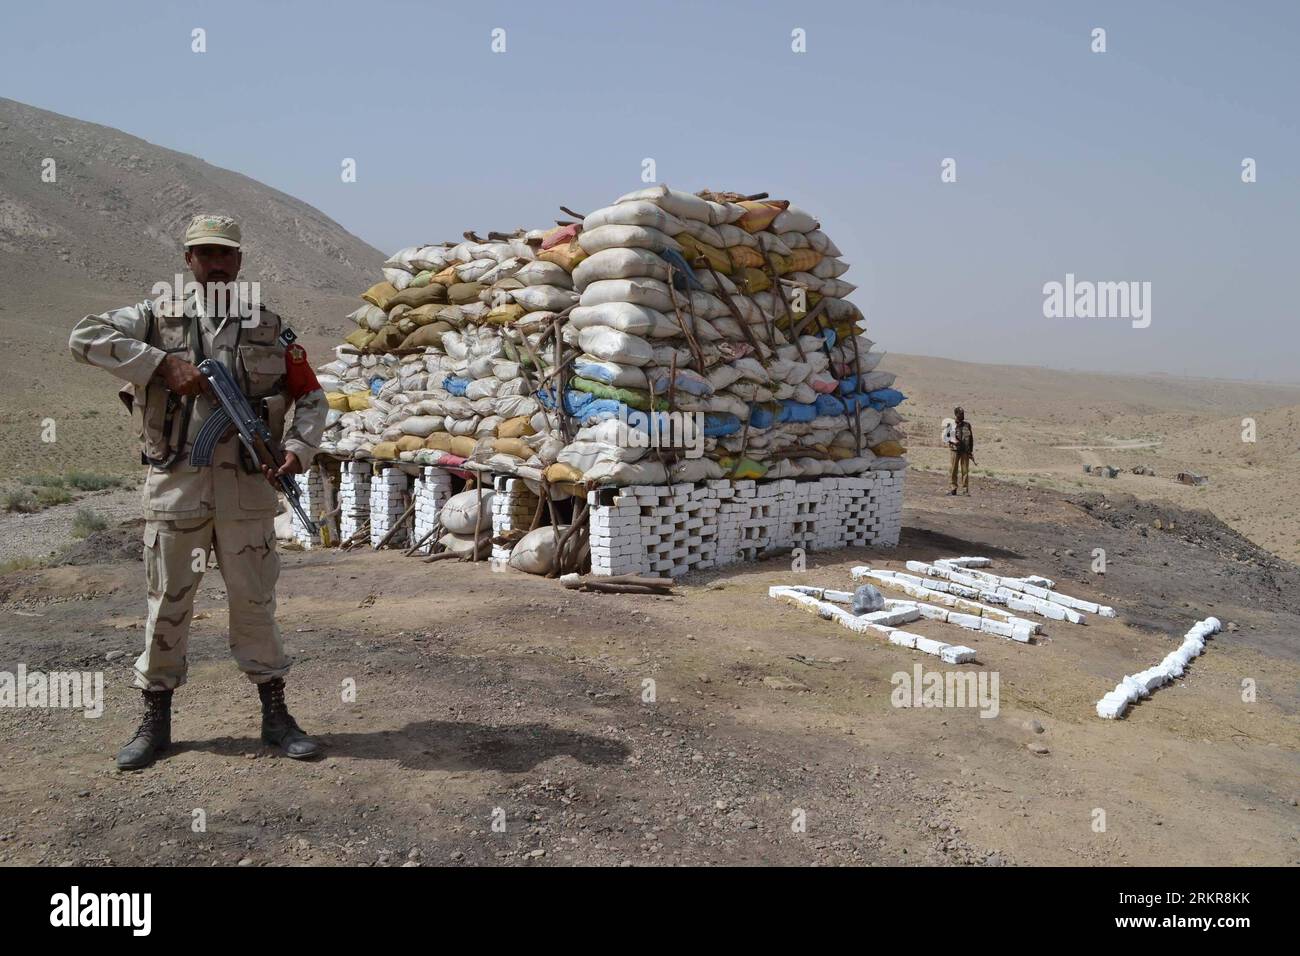 Bildnummer: 58152813  Datum: 26.06.2012  Copyright: imago/Xinhua (120626) -- QUETTA, June 26, 2012 (Xinhua) -- A Pakistani soldier stands guard beside a pile of drugs to be burnt during an event marking the International Day Against Drug Abuse and Illicit Trafficking, in southwest Pakistan s Quetta, June 26, 2012. About 60 tones of seized drugs were burnt during the ceremony organized by the Anti-narcotics Force (ANF) and Frontier Core (FC) in Quetta. (Xinhua/Mohammad) PAKISTAN-DRUGS-QUETTA-BURN PUBLICATIONxNOTxINxCHN Gesellschaft Weltdrogentag Kriminalität Drogenkriminalität Drogen Vernichtun Stock Photo